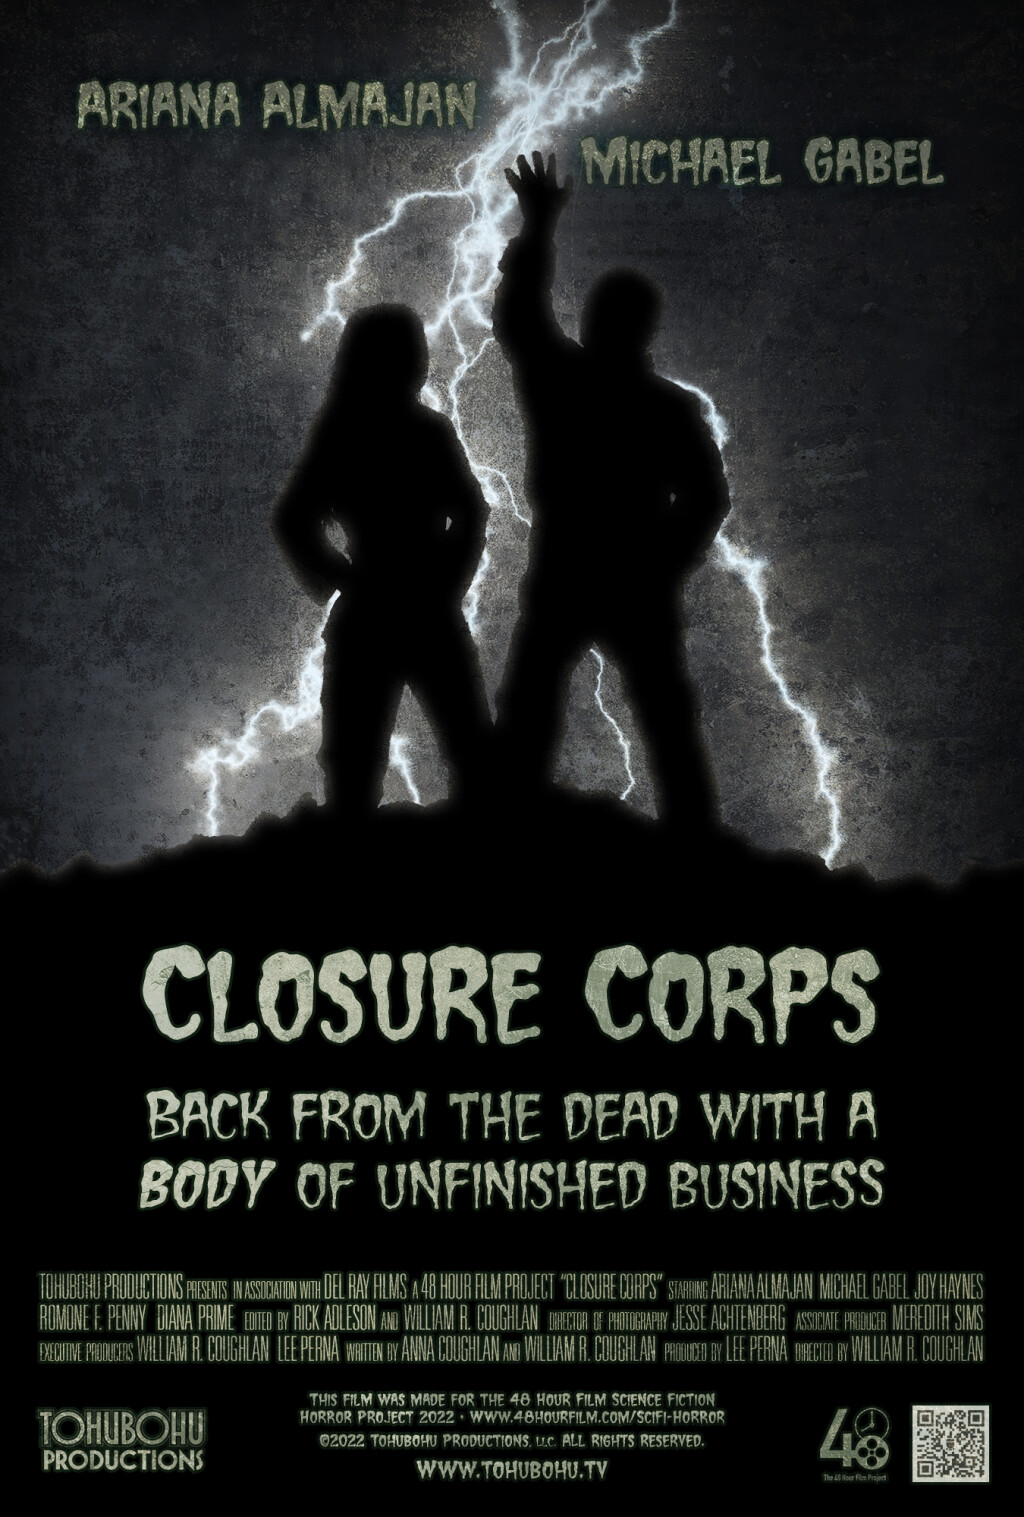 Filmposter for Closure Corps